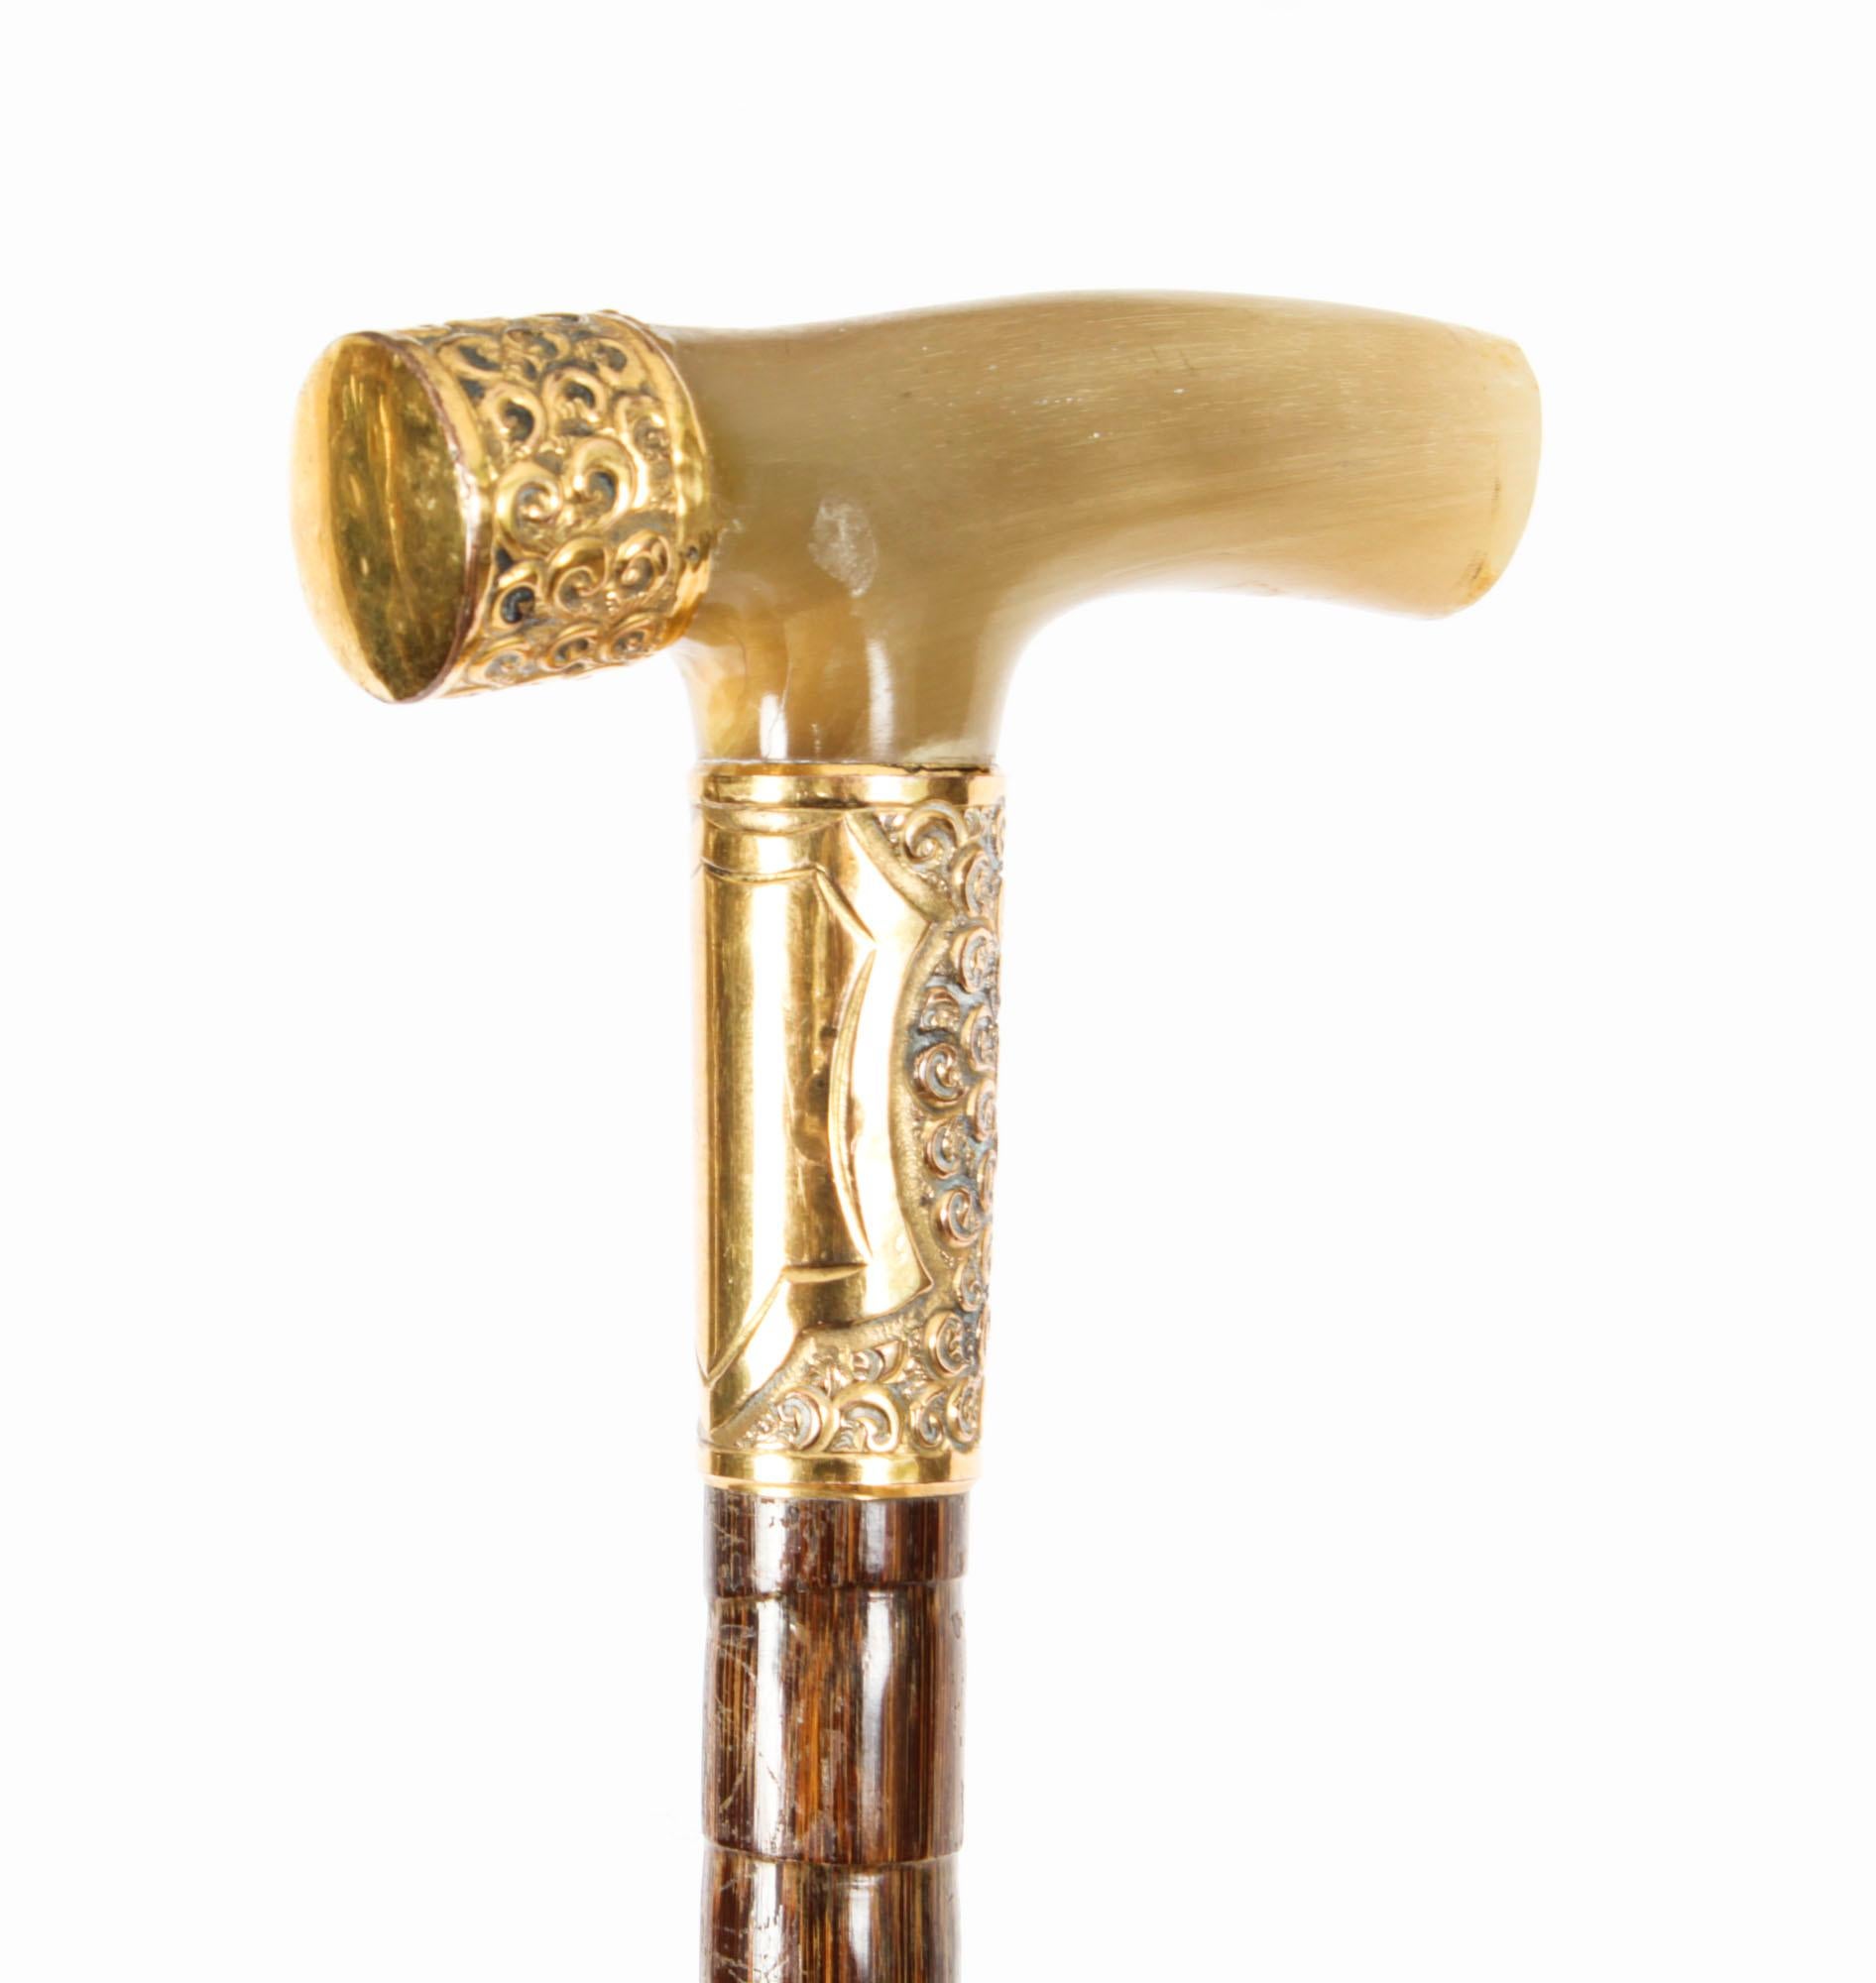 This is a fantastic antique French gentleman's walking stick with a very decorative horn and gold mounted handle, late 19th century in date.
 
It has a very decorative horn handle with gold mounts on a tapered bamboo shaft, and it features the